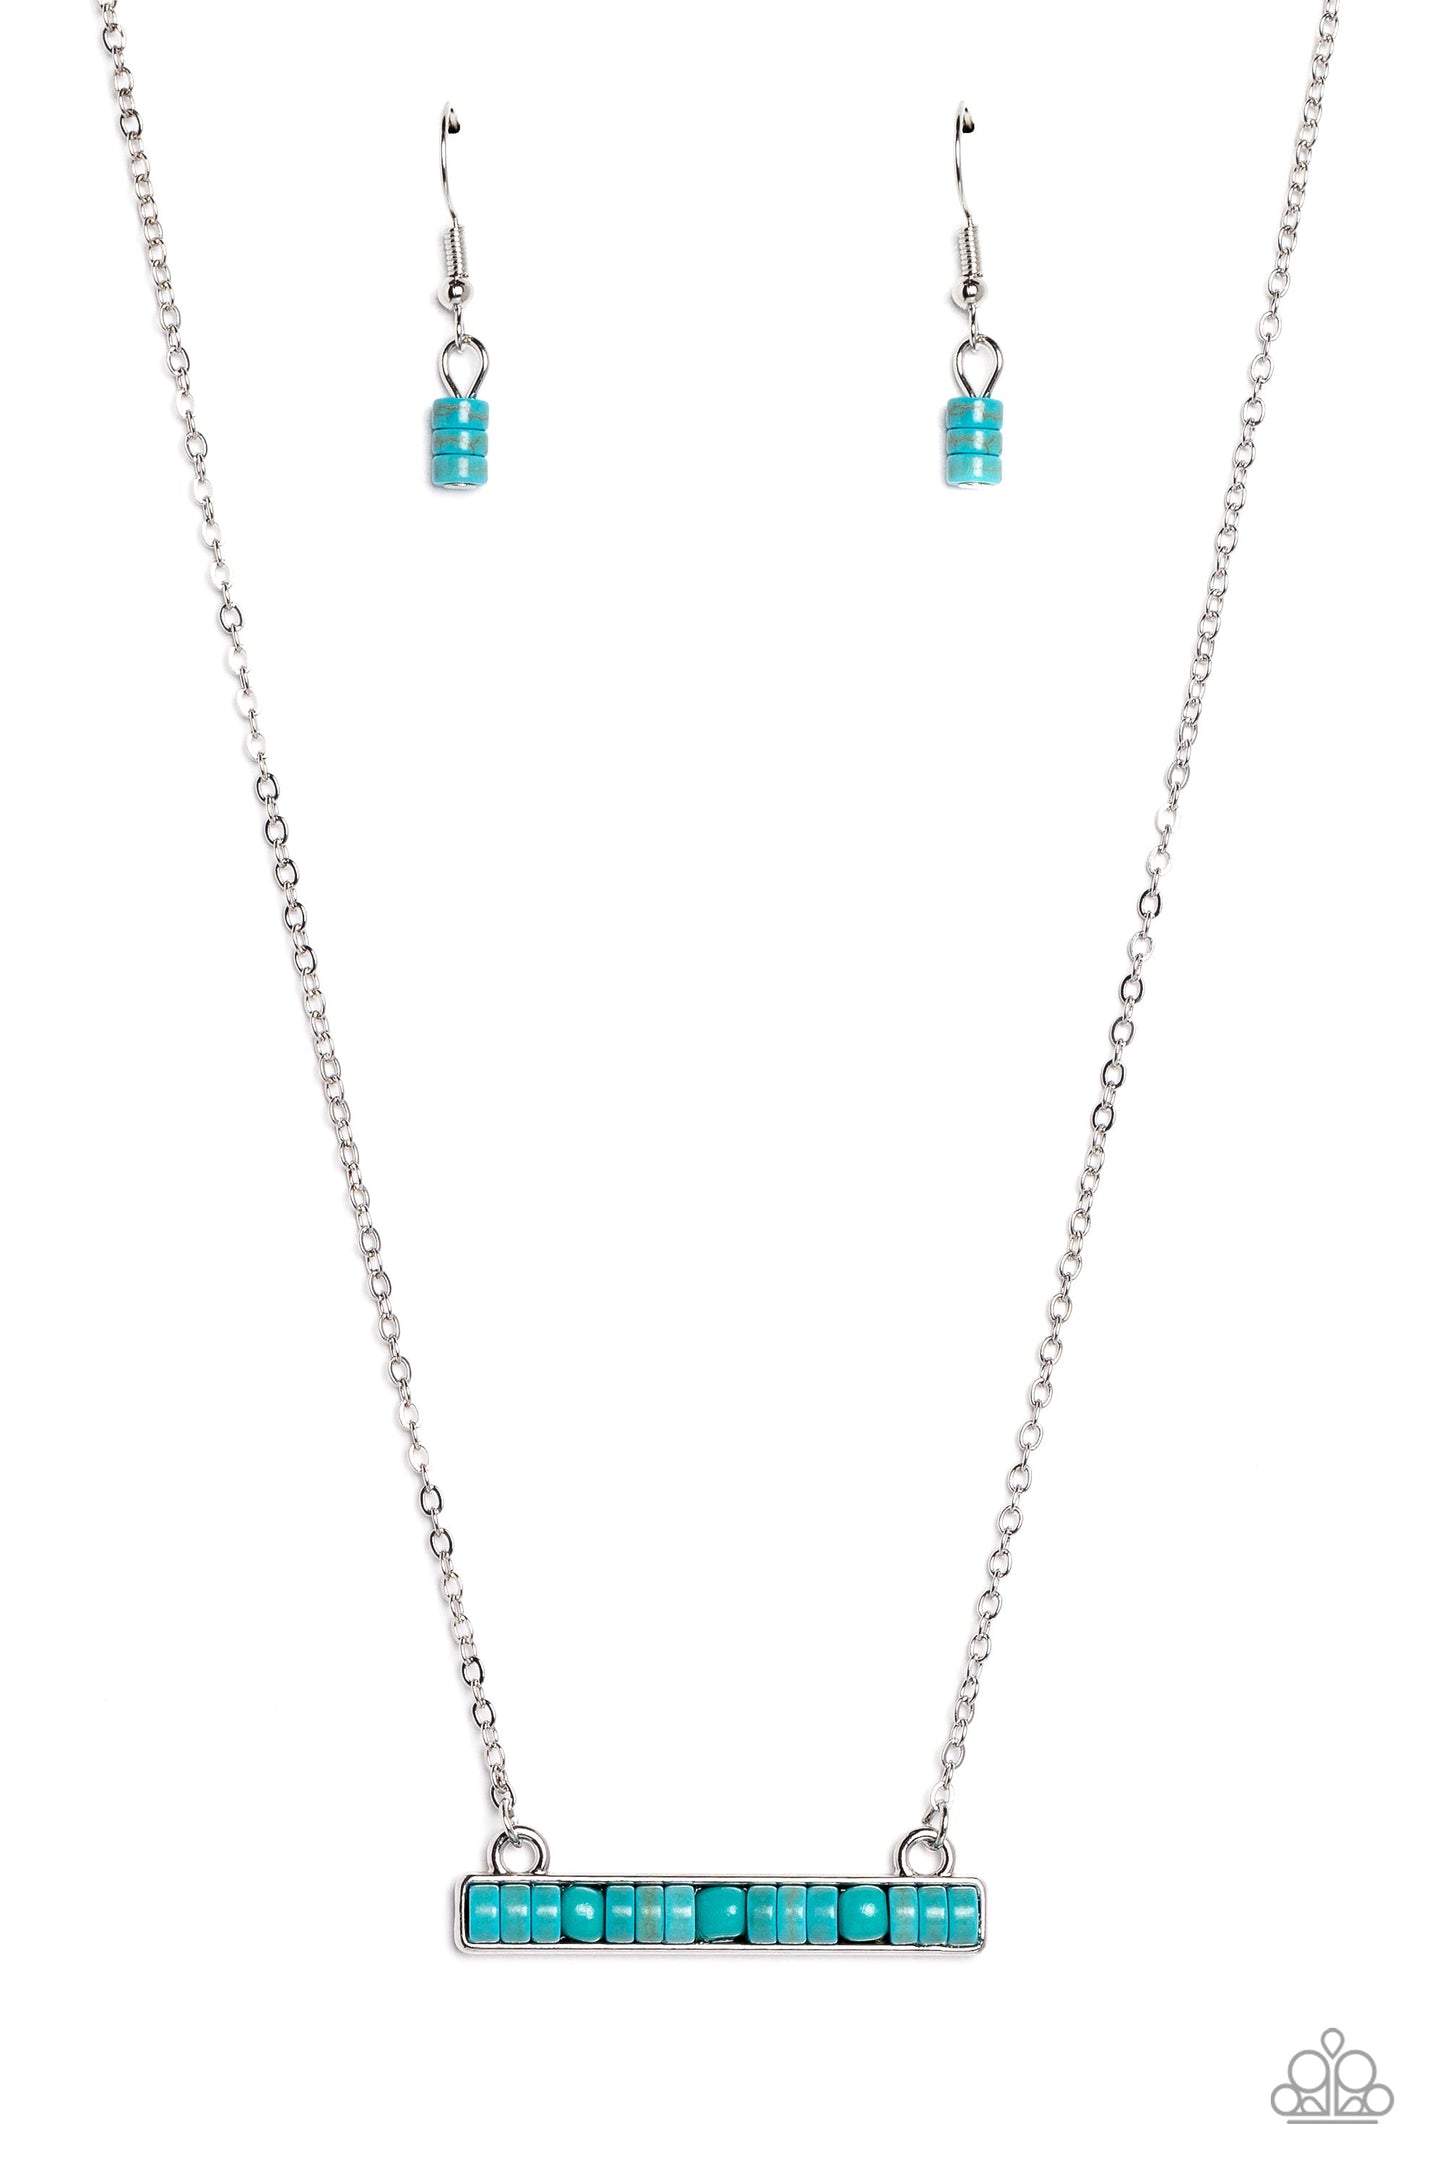 Barred Bohemian - Blue/Turquoise Stone Disc Pendant Paparazzi Necklace & matching earrings